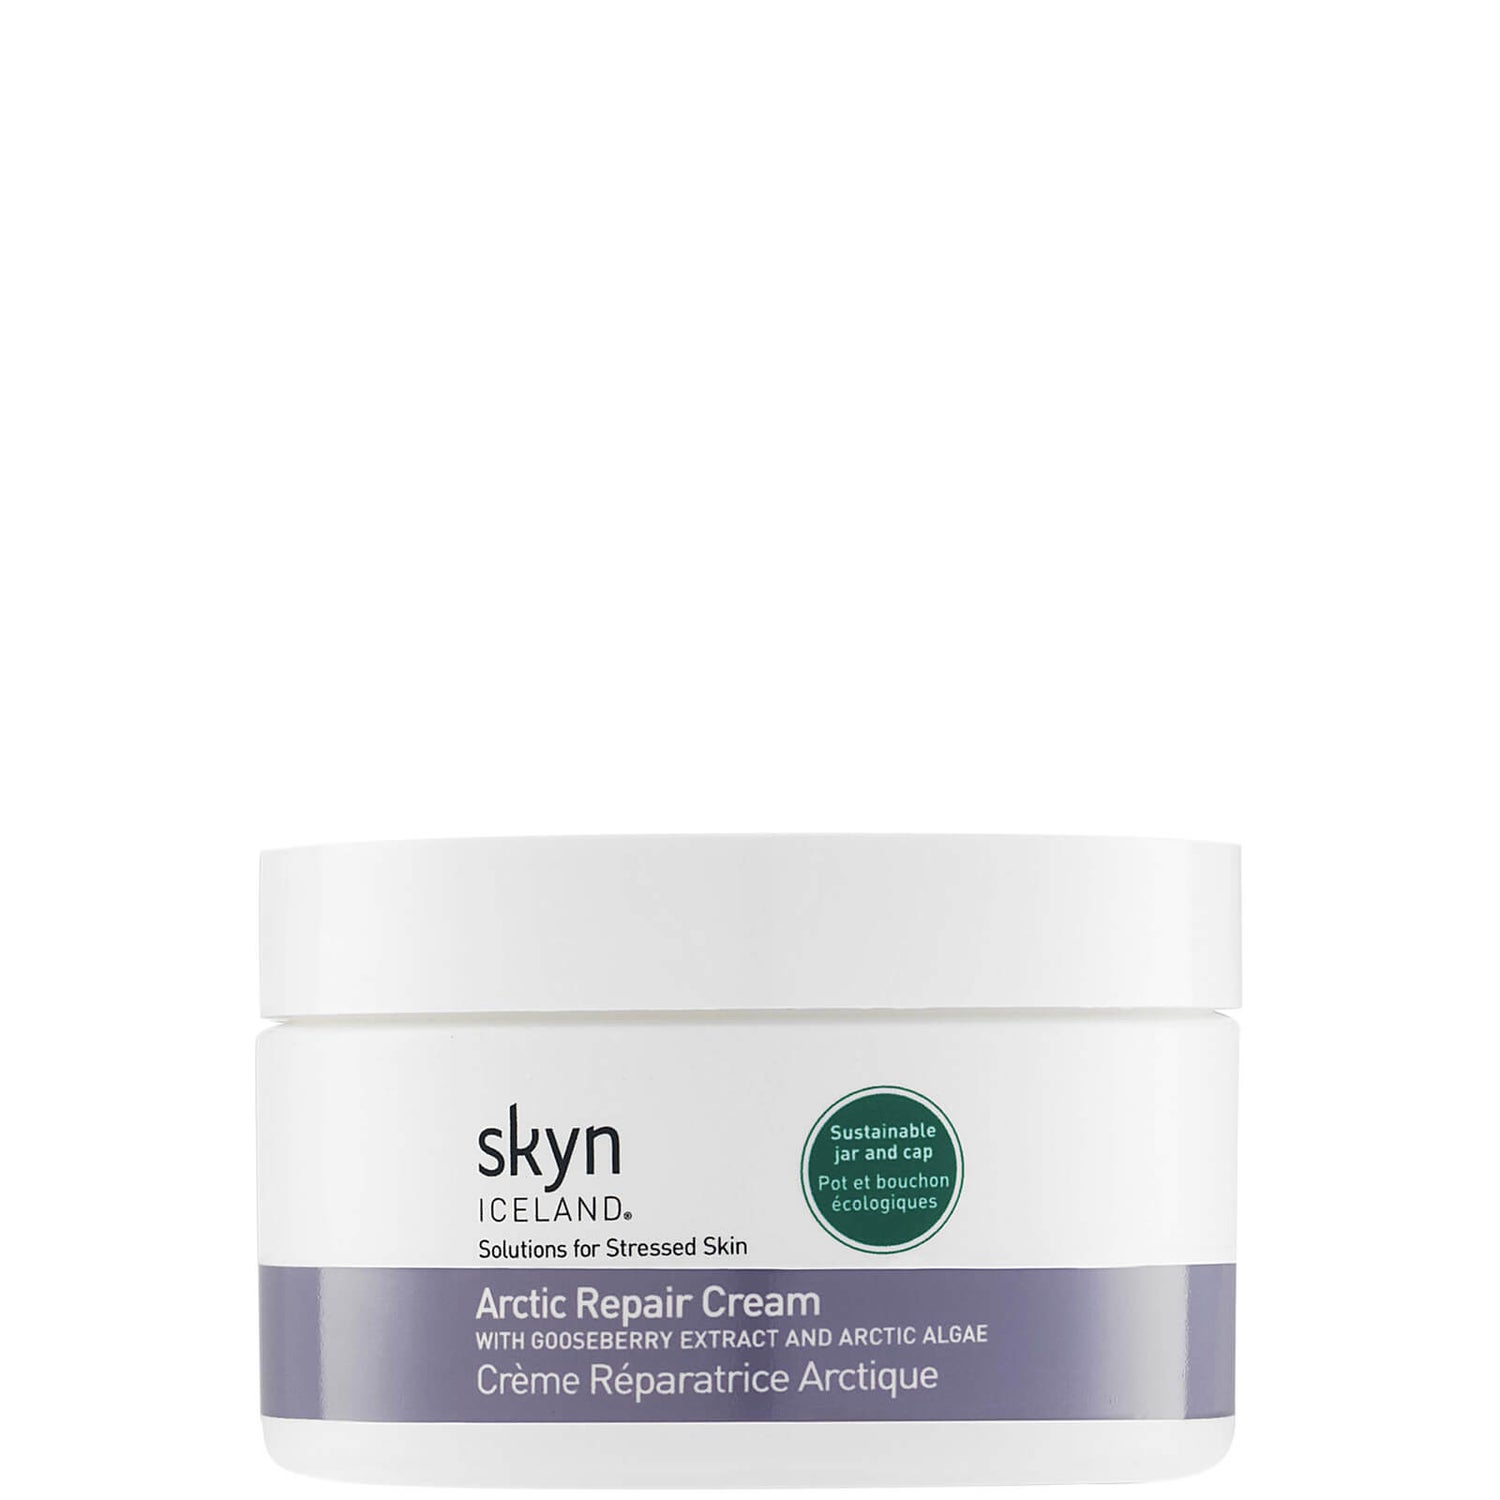 skyn ICELAND Arctic Repair Cream with Gooseberry Extract and Arctic Algae 250 g.